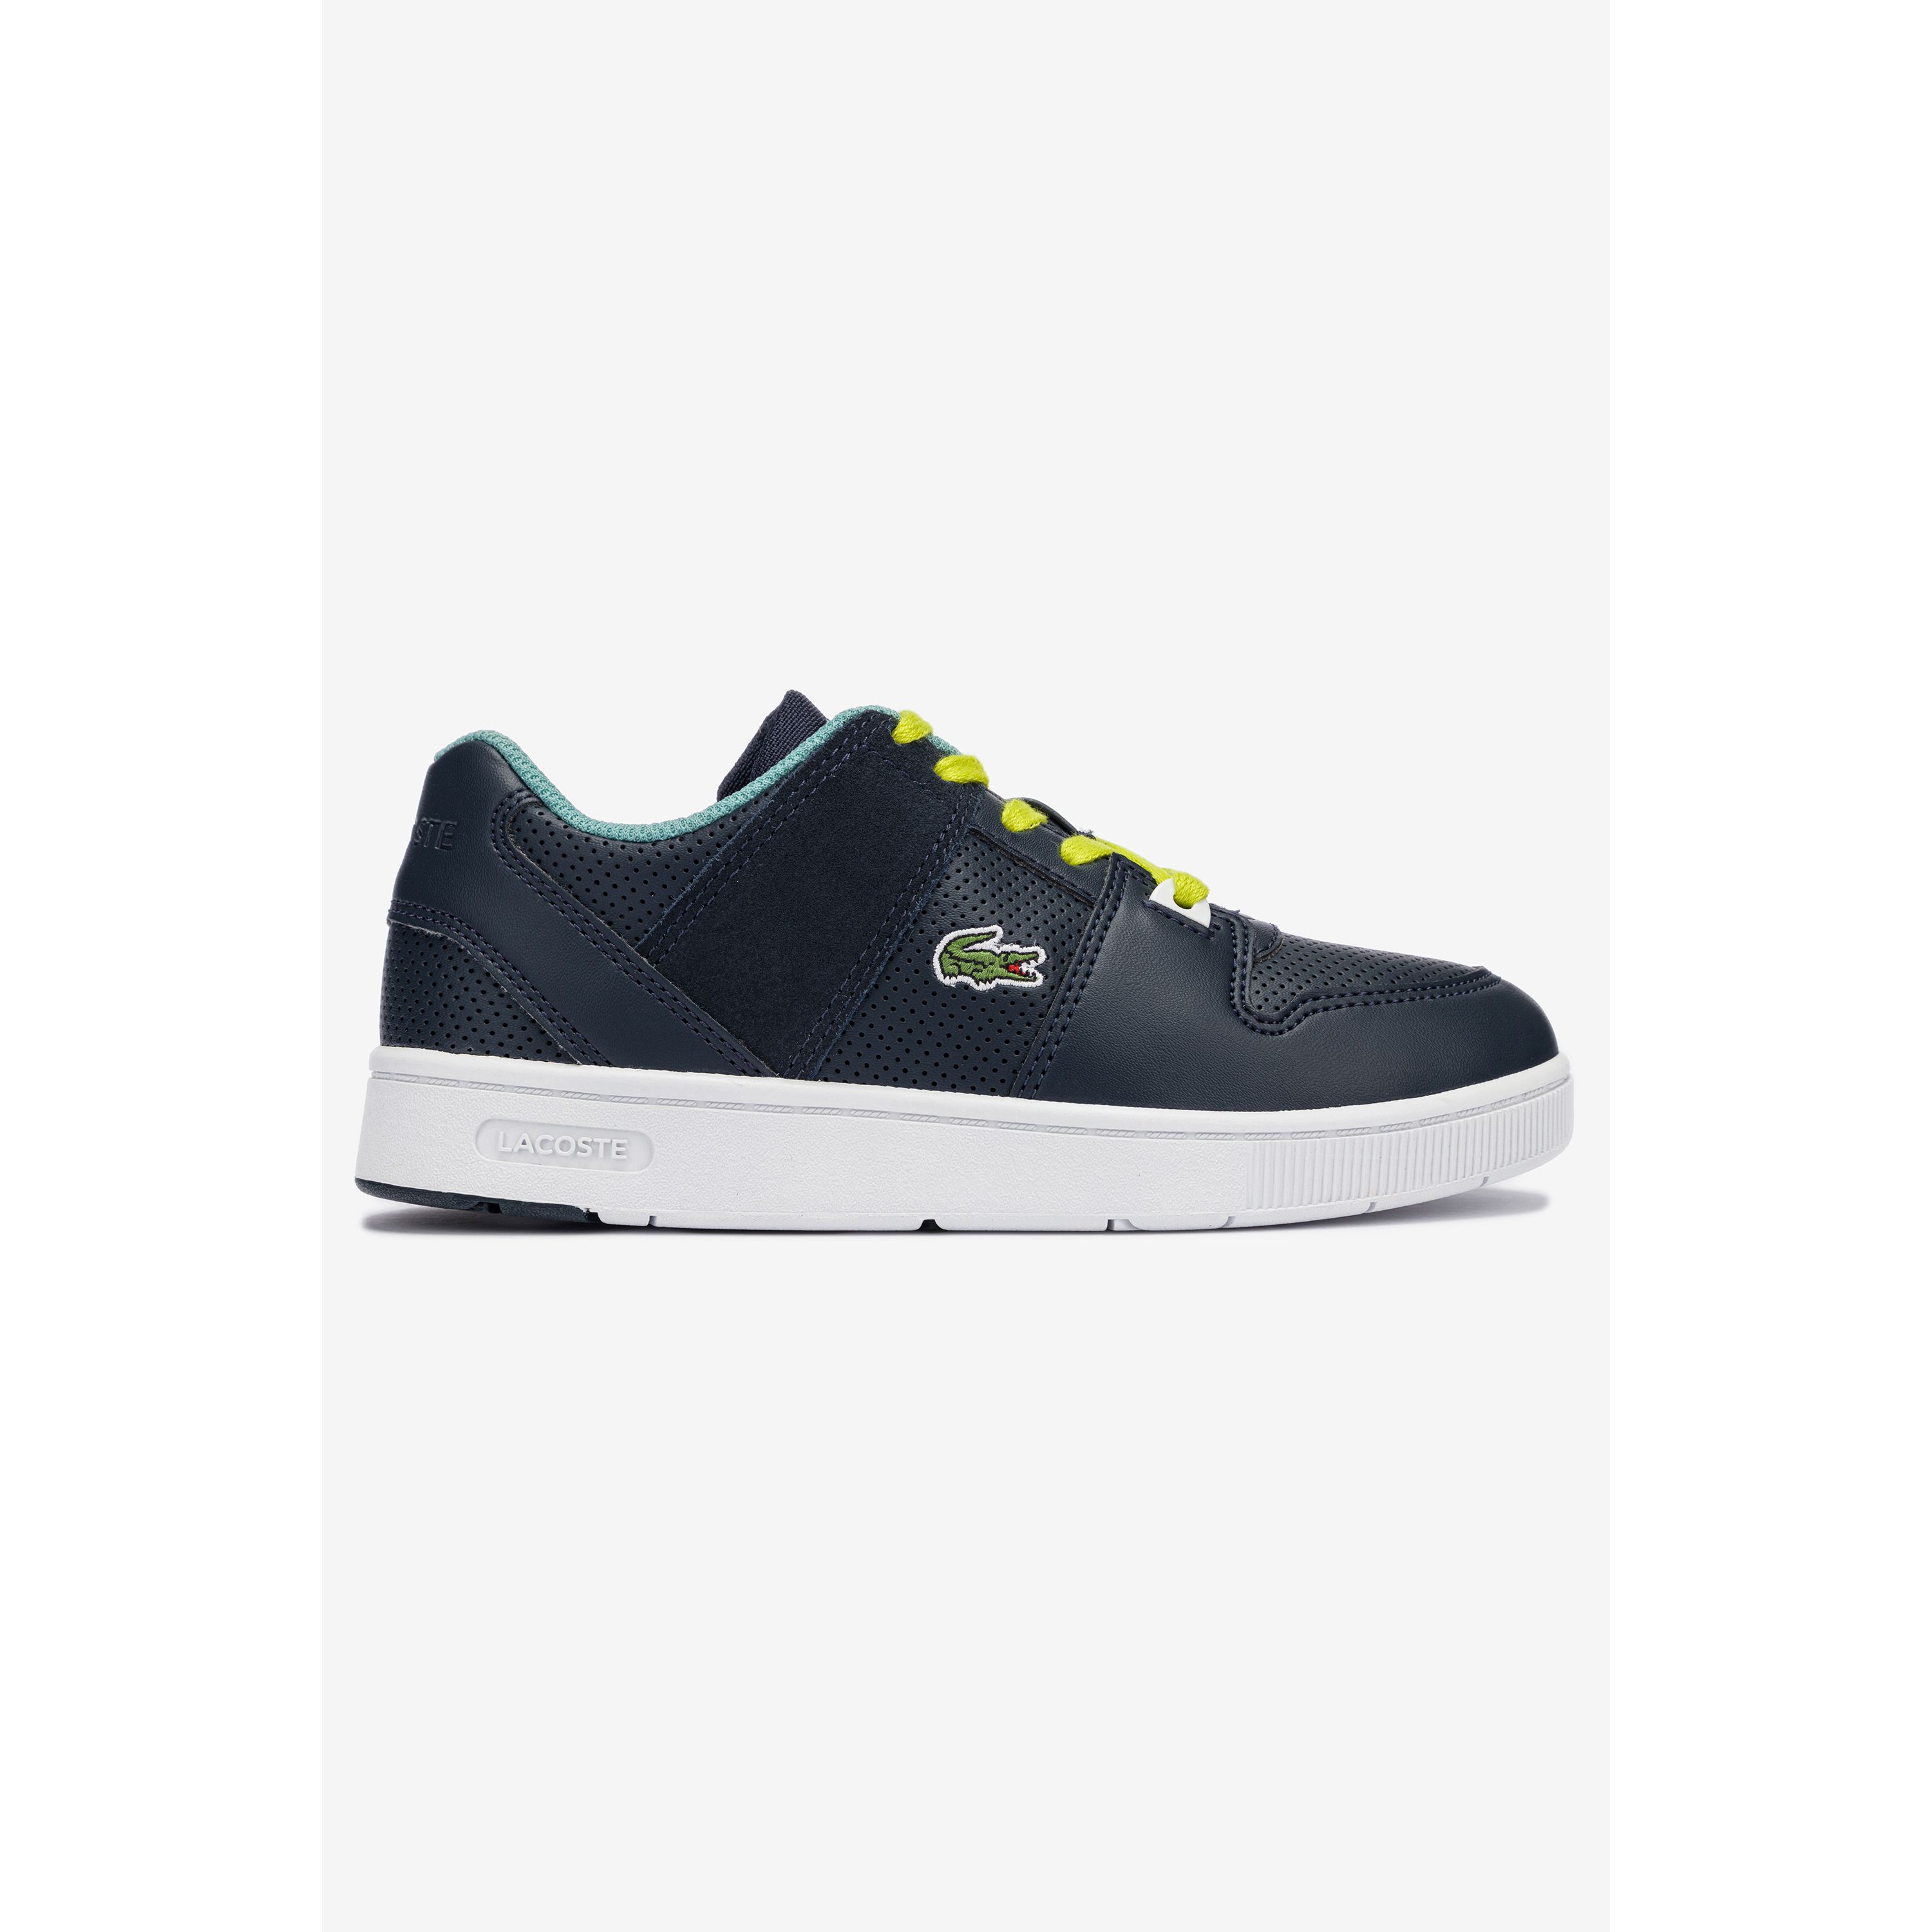 Lacoste Boty Thrill 0320 1 S